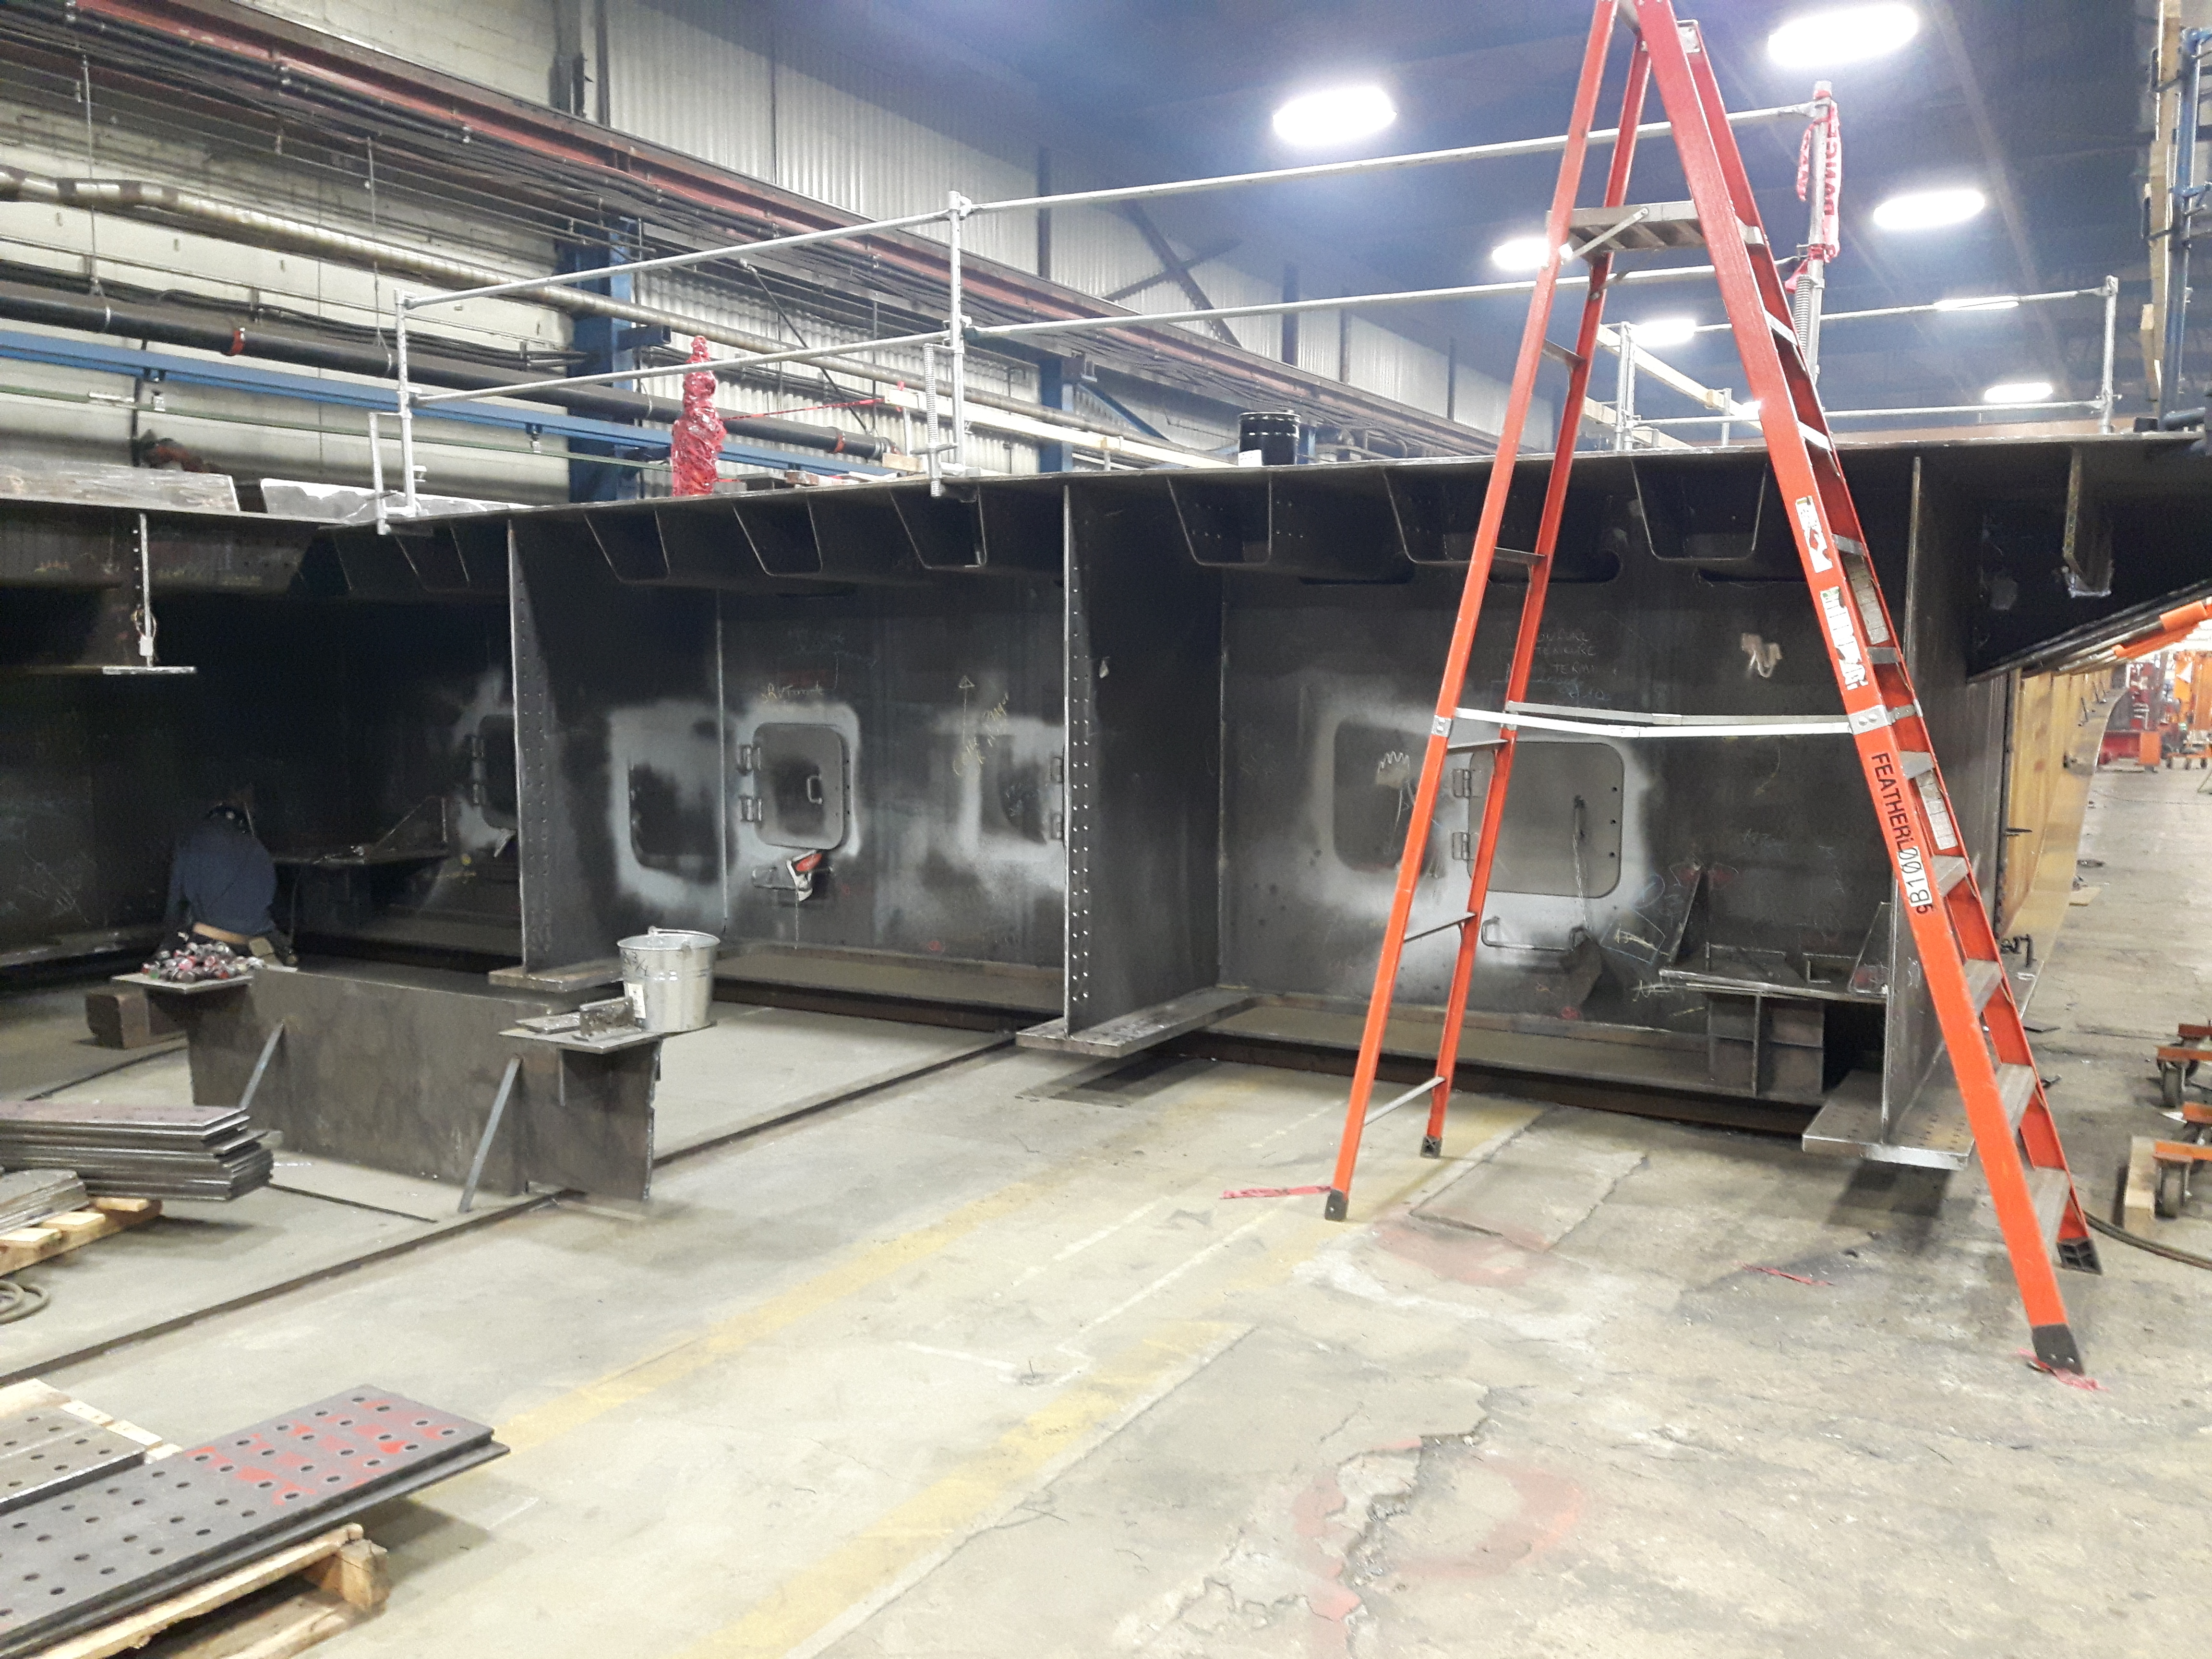 A large section of steel is being fabricated in a machine shop.